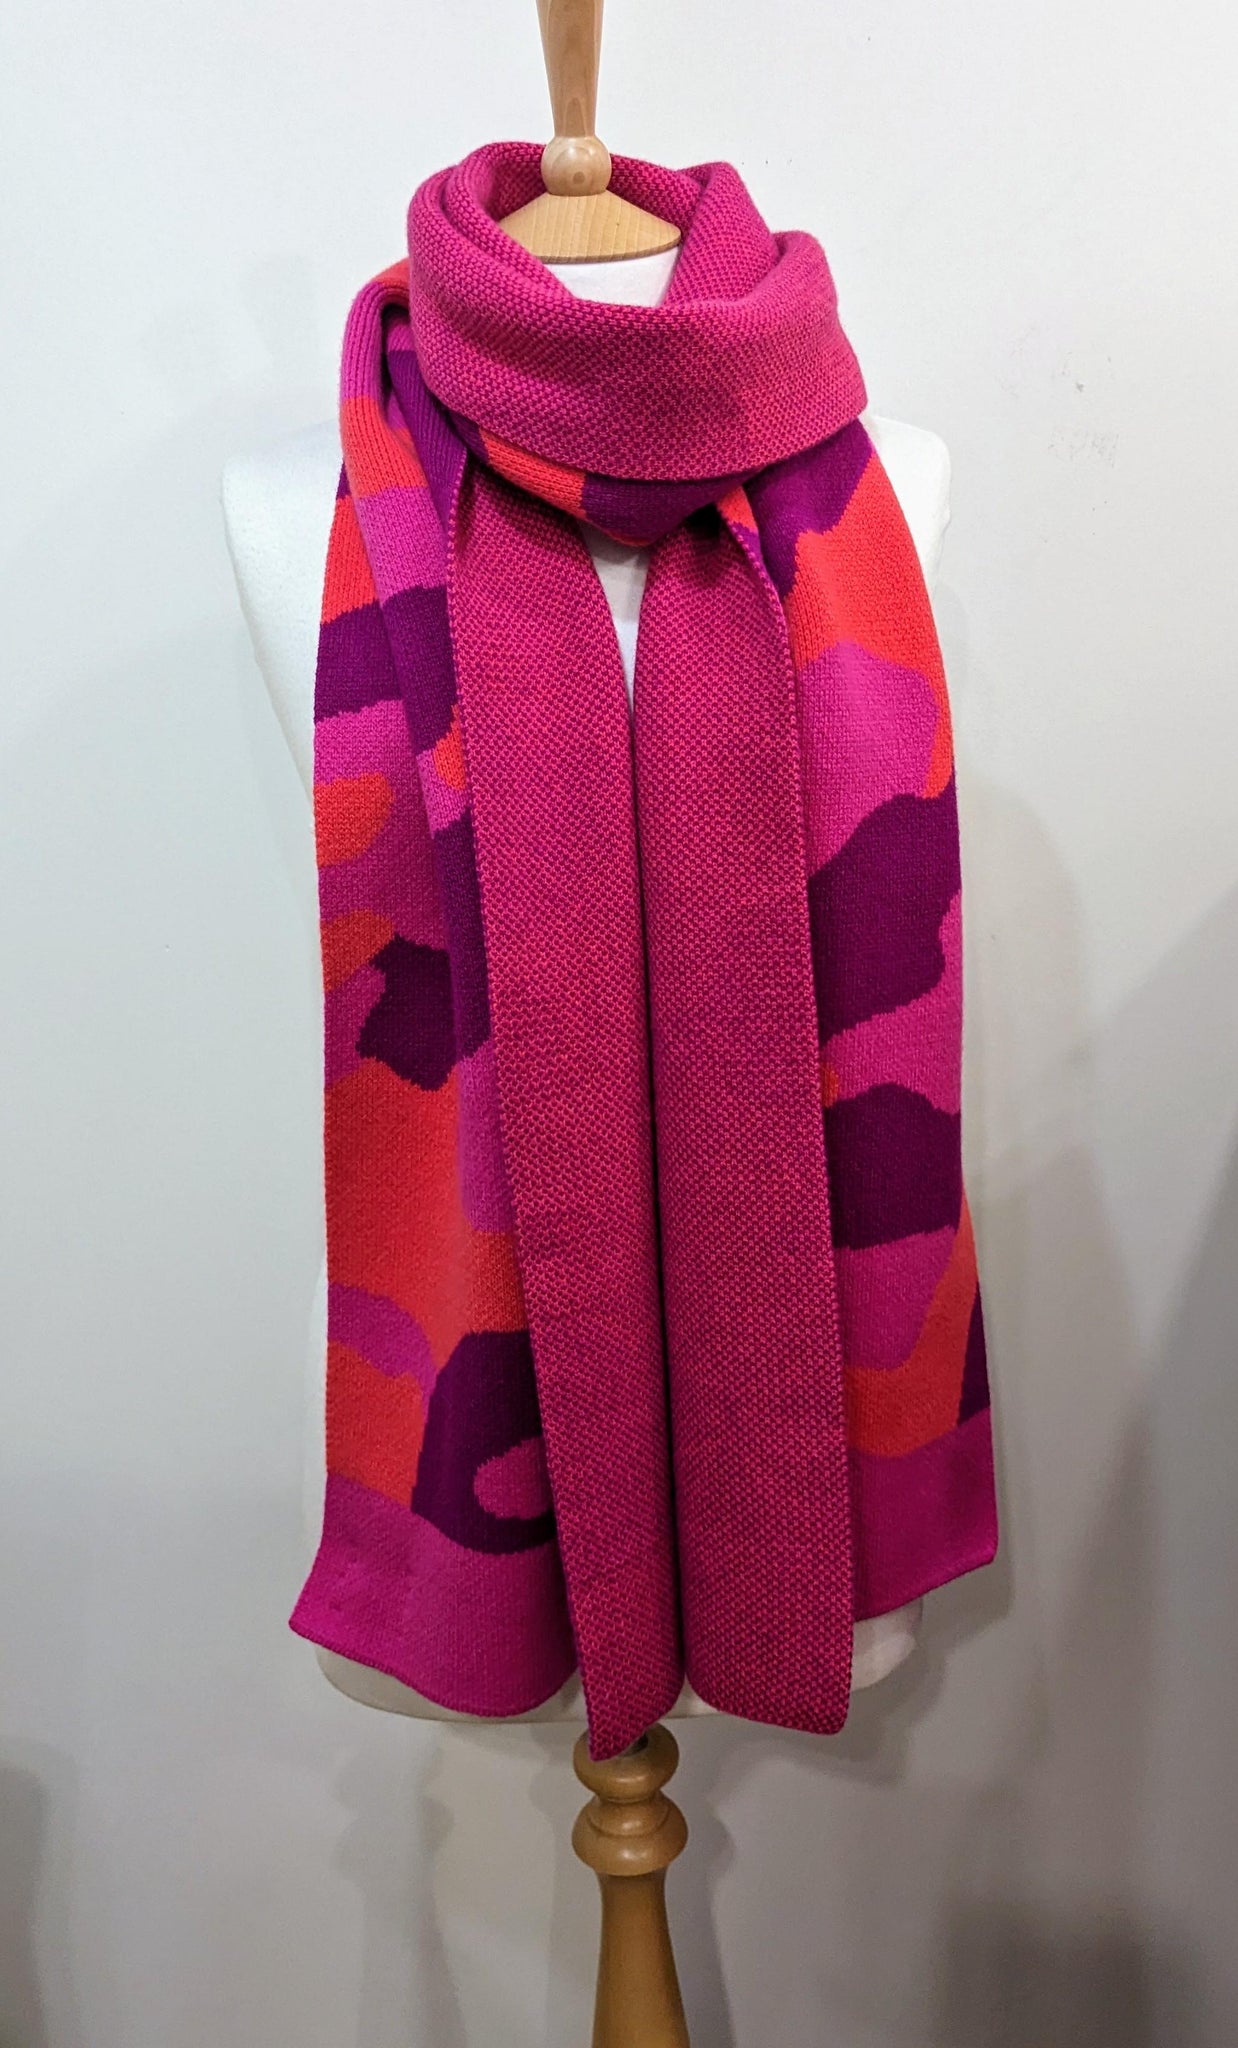 Camo Blanket Scarf In Pink Mix